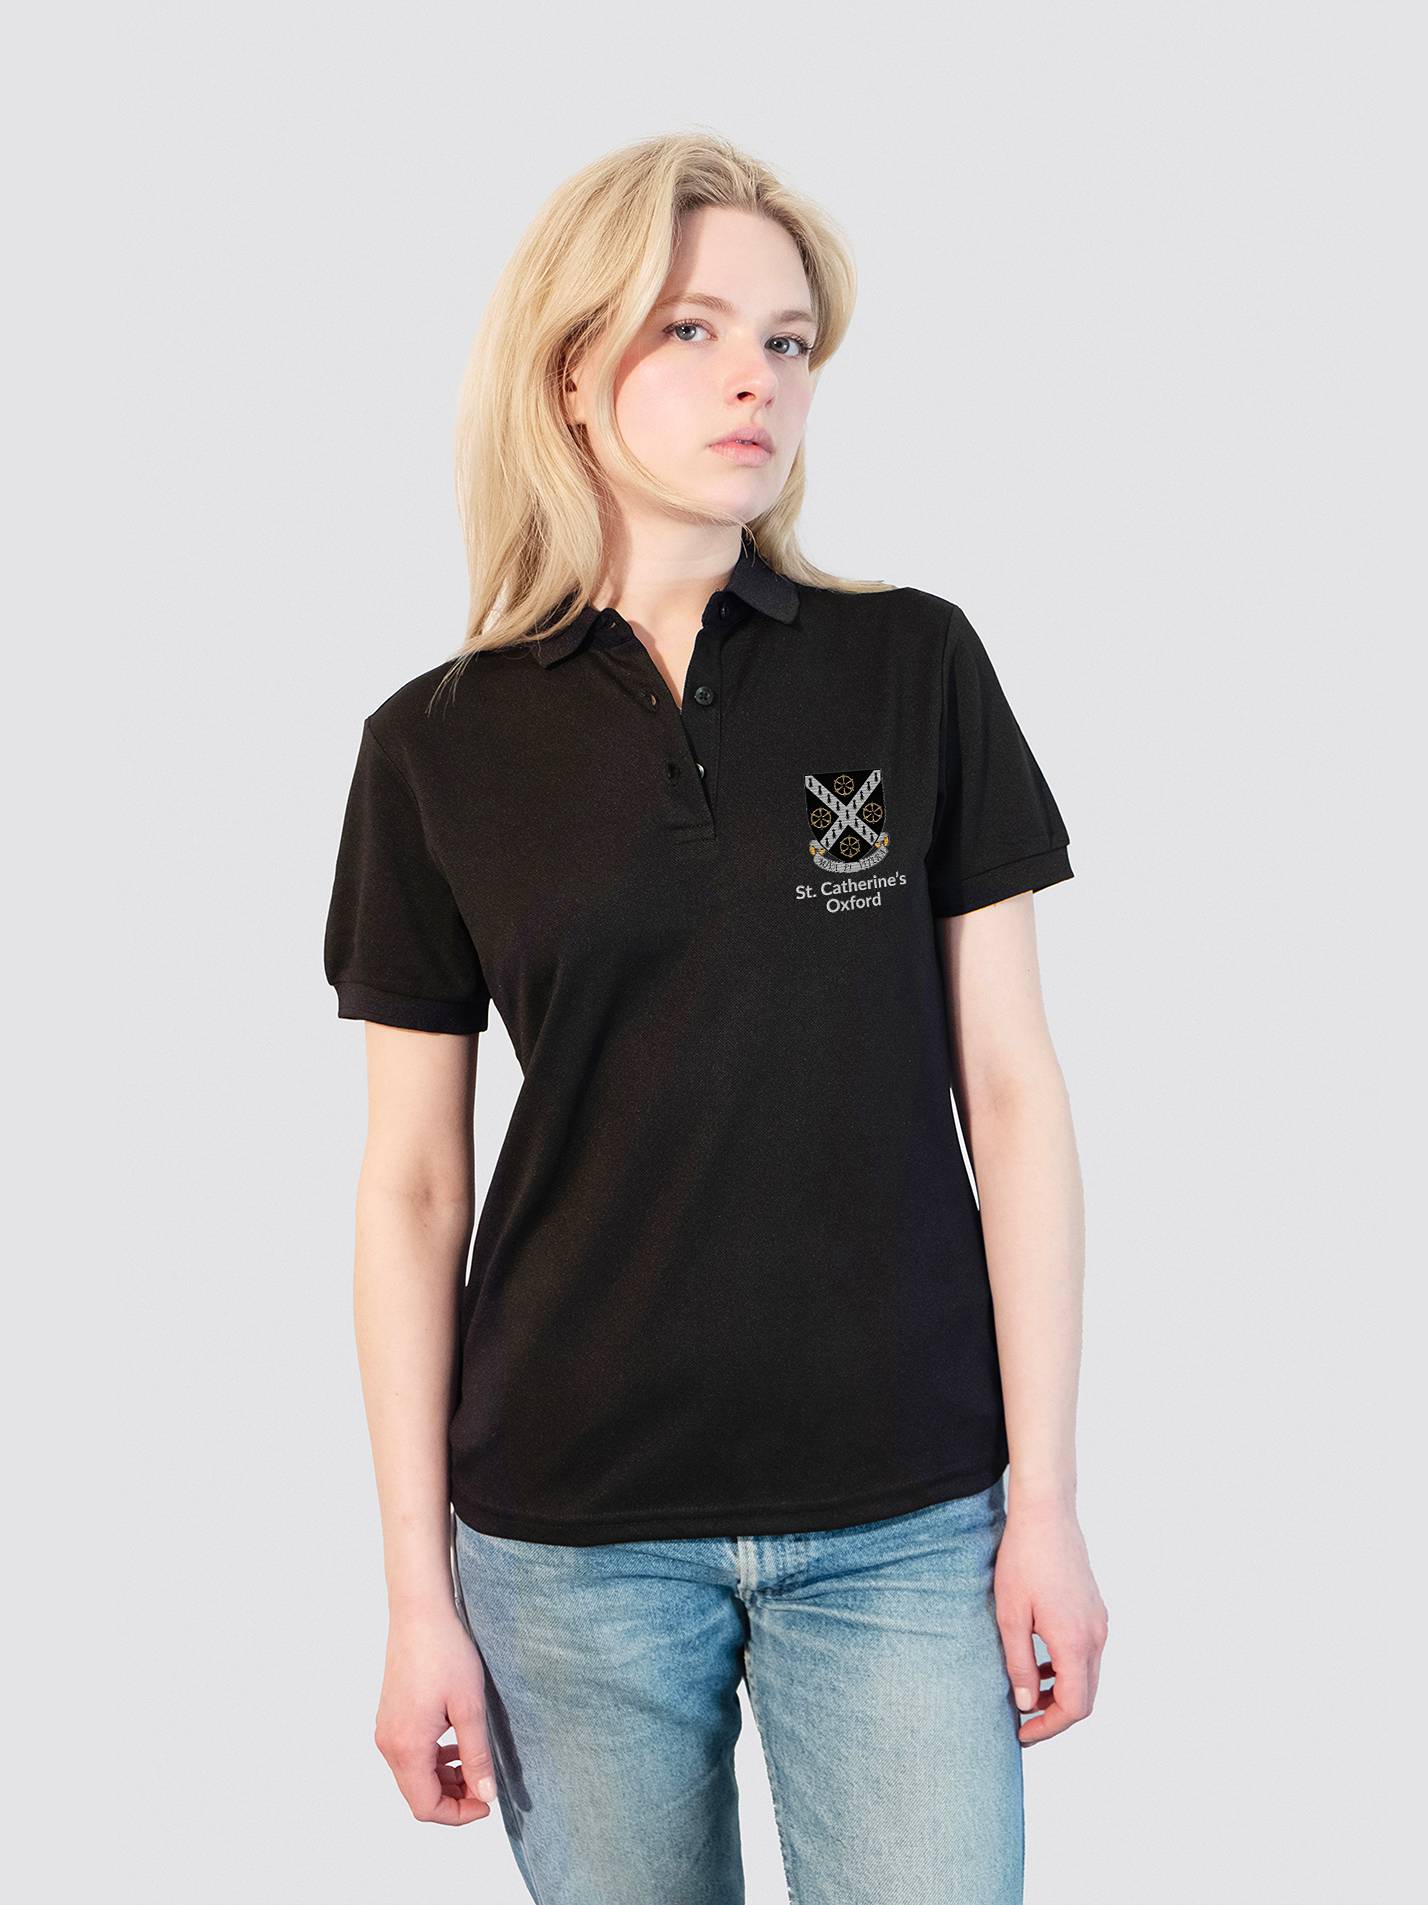 St Catherine's College Oxford MCR Sustainable Ladies Polo Shirt